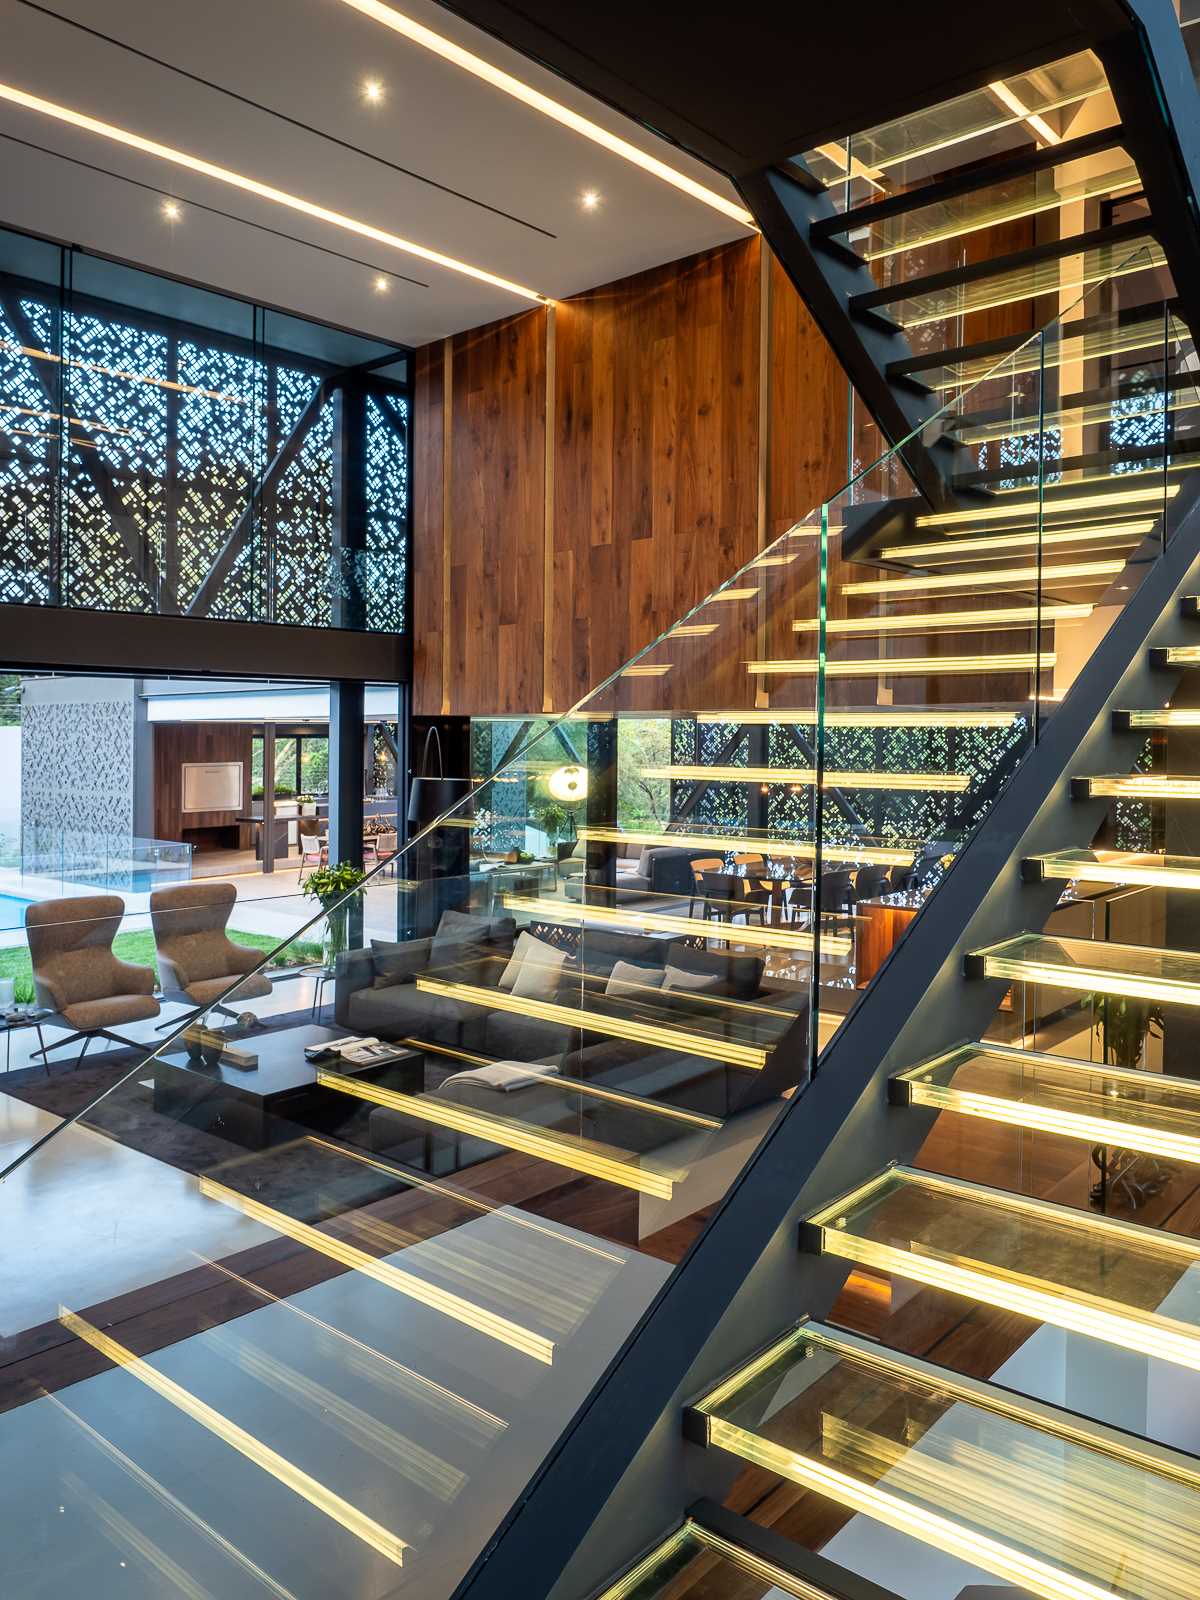 A glass staircase with hidden lighting connects the lower levels of this modern house with the more private areas upstairs.